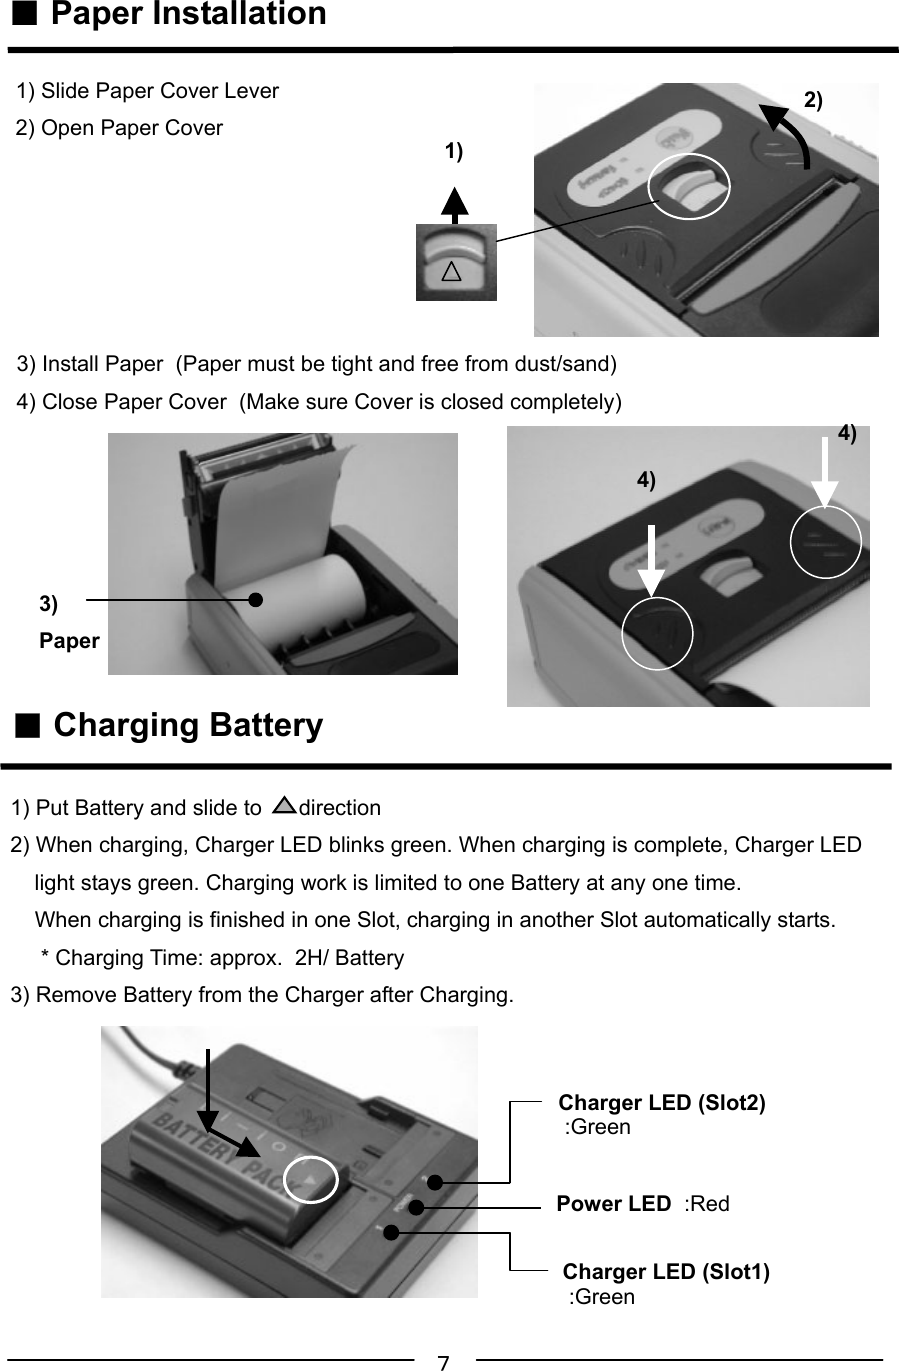 ７ ■ Paper Installation ■ Charging Battery1) Slide Paper Cover Lever2) Open Paper Cover3)Paper4)4)2)1)1) Put Battery and slide to      direction2) When charging, Charger LED blinks green. When charging is complete, Charger LED    light stays green. Charging work is limited to one Battery at any one time.    When charging is finished in one Slot, charging in another Slot automatically starts.     * Charging Time: approx.  2H/ Battery3) Remove Battery from the Charger after Charging.Power LED  :RedCharger LED (Slot2) :GreenCharger LED (Slot1) :Green3) Install Paper  (Paper must be tight and free from dust/sand)4) Close Paper Cover  (Make sure Cover is closed completely)